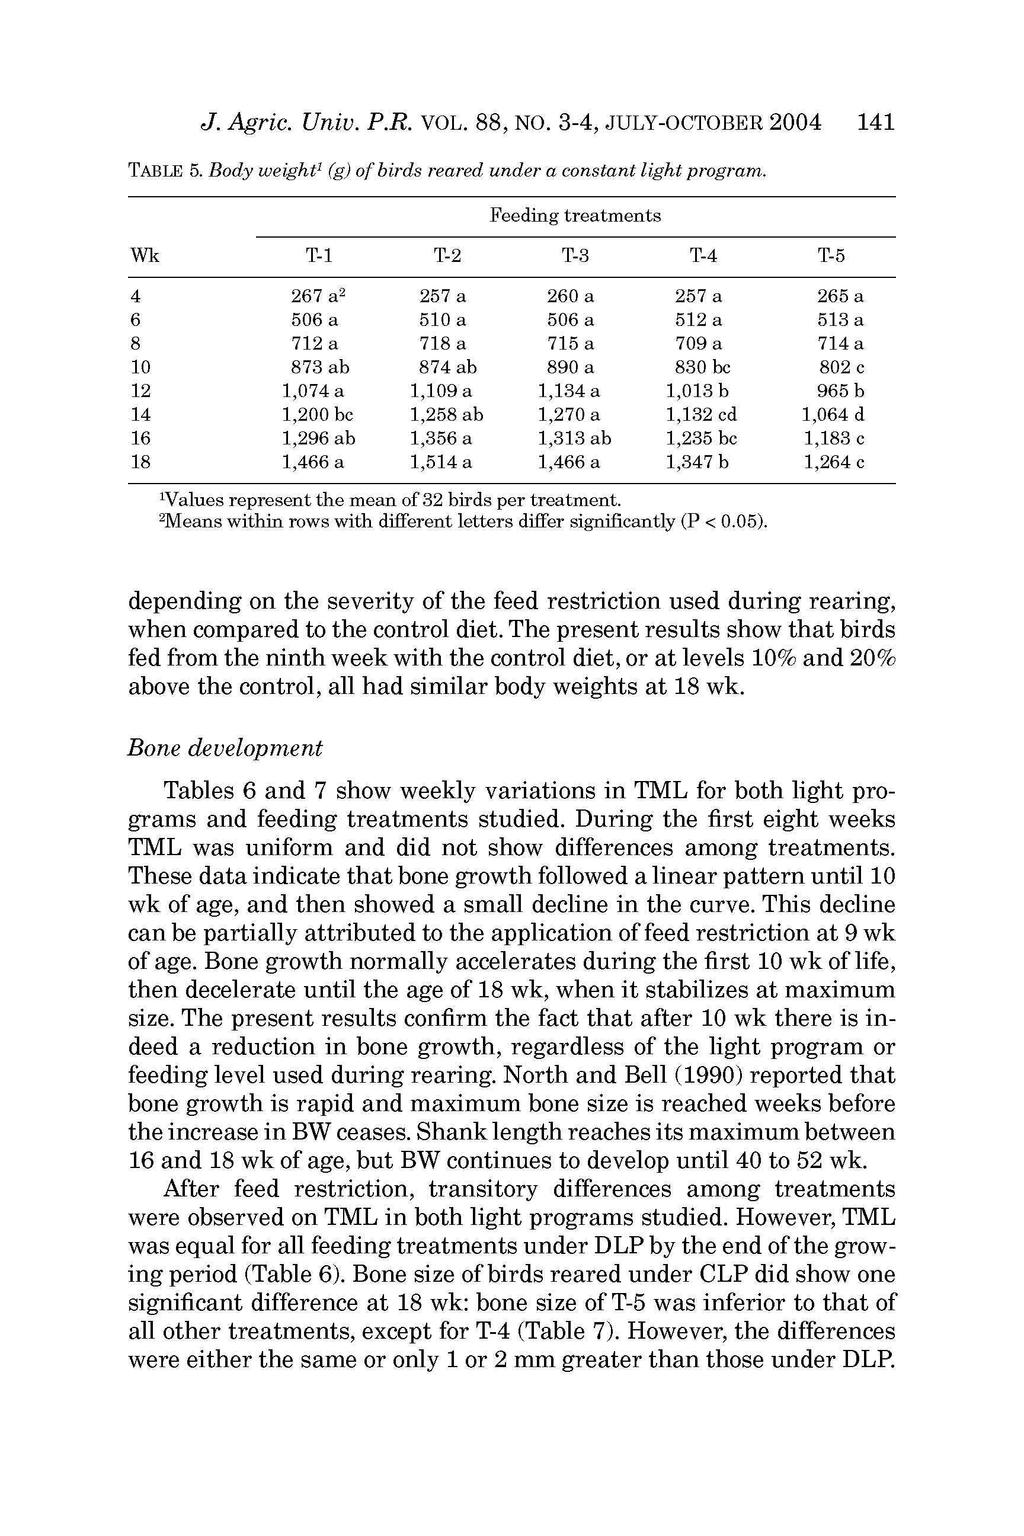 J. Agrie. Univ. P.R. VOL. 88, NO. 3-4, JULY-OCTOBER 2004 1 TABLE 5. Body weight 1 (g) of birds reared under a constant light program.